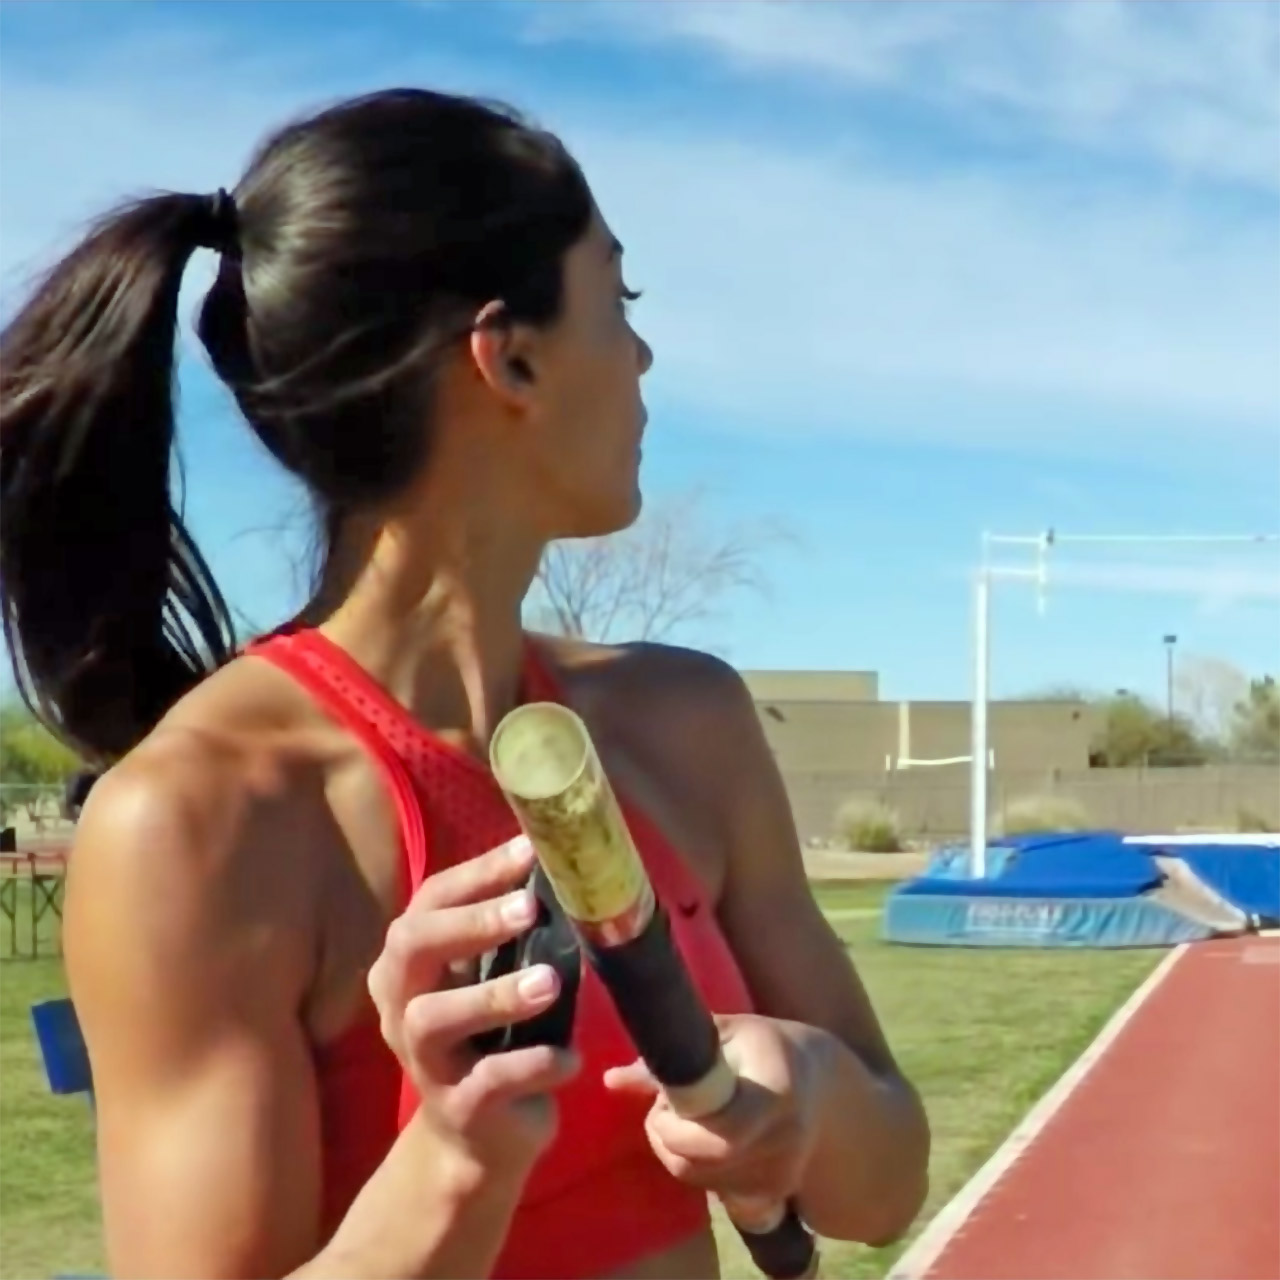 Pole vaulter Allison Stokke looking ahead to new challenges